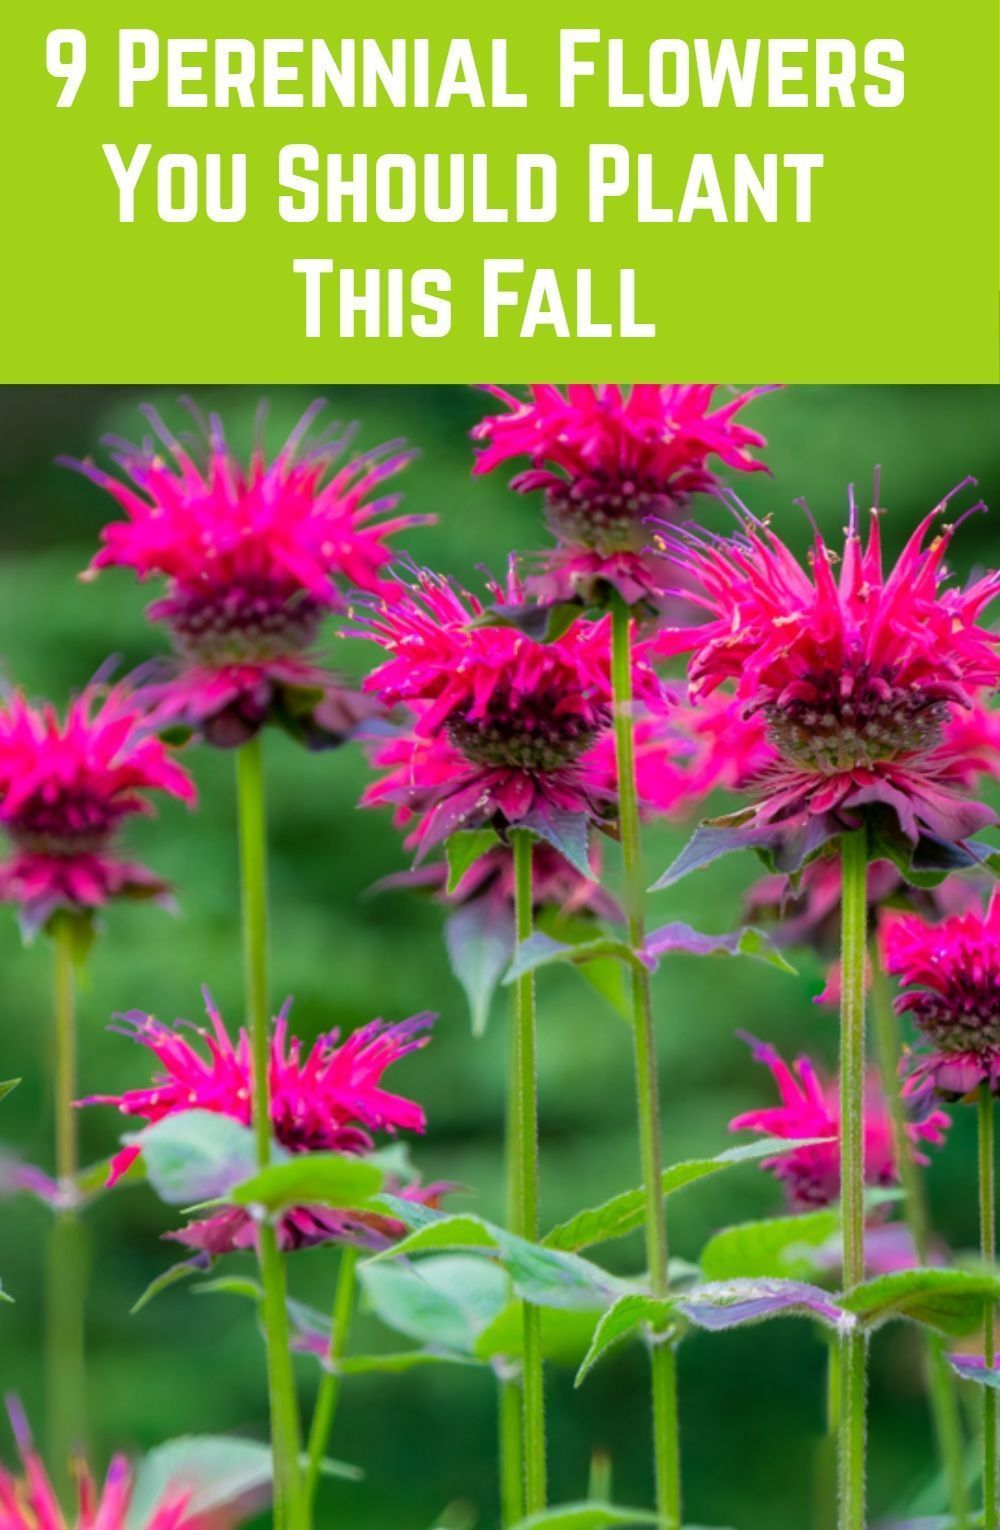 9 Perennials You Should Plant This Fall -   beauty Flowers garden